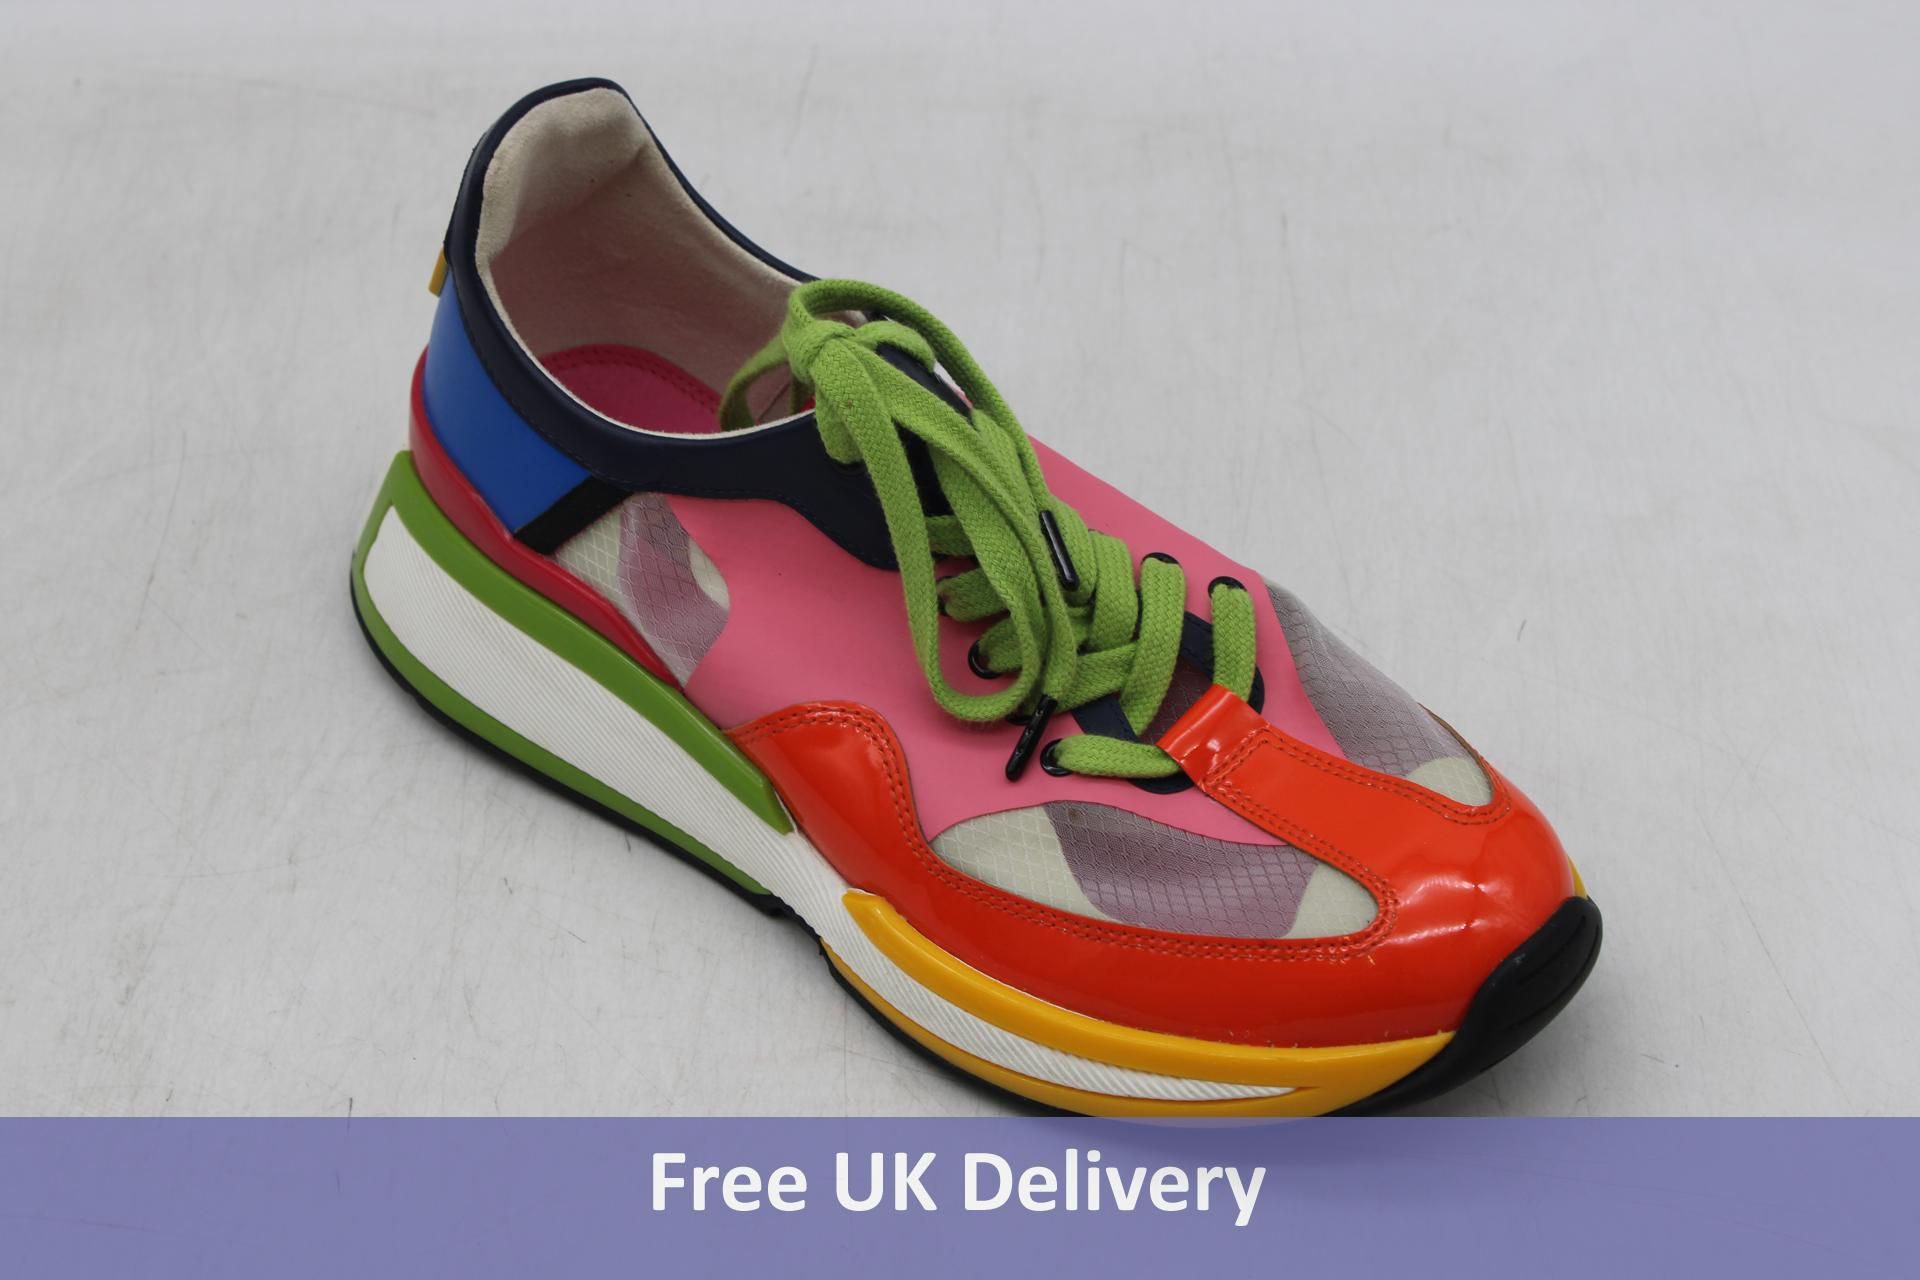 Kat Maconie Marianne Multibright Trainers, Size 40. Used, Good Condition, No Box